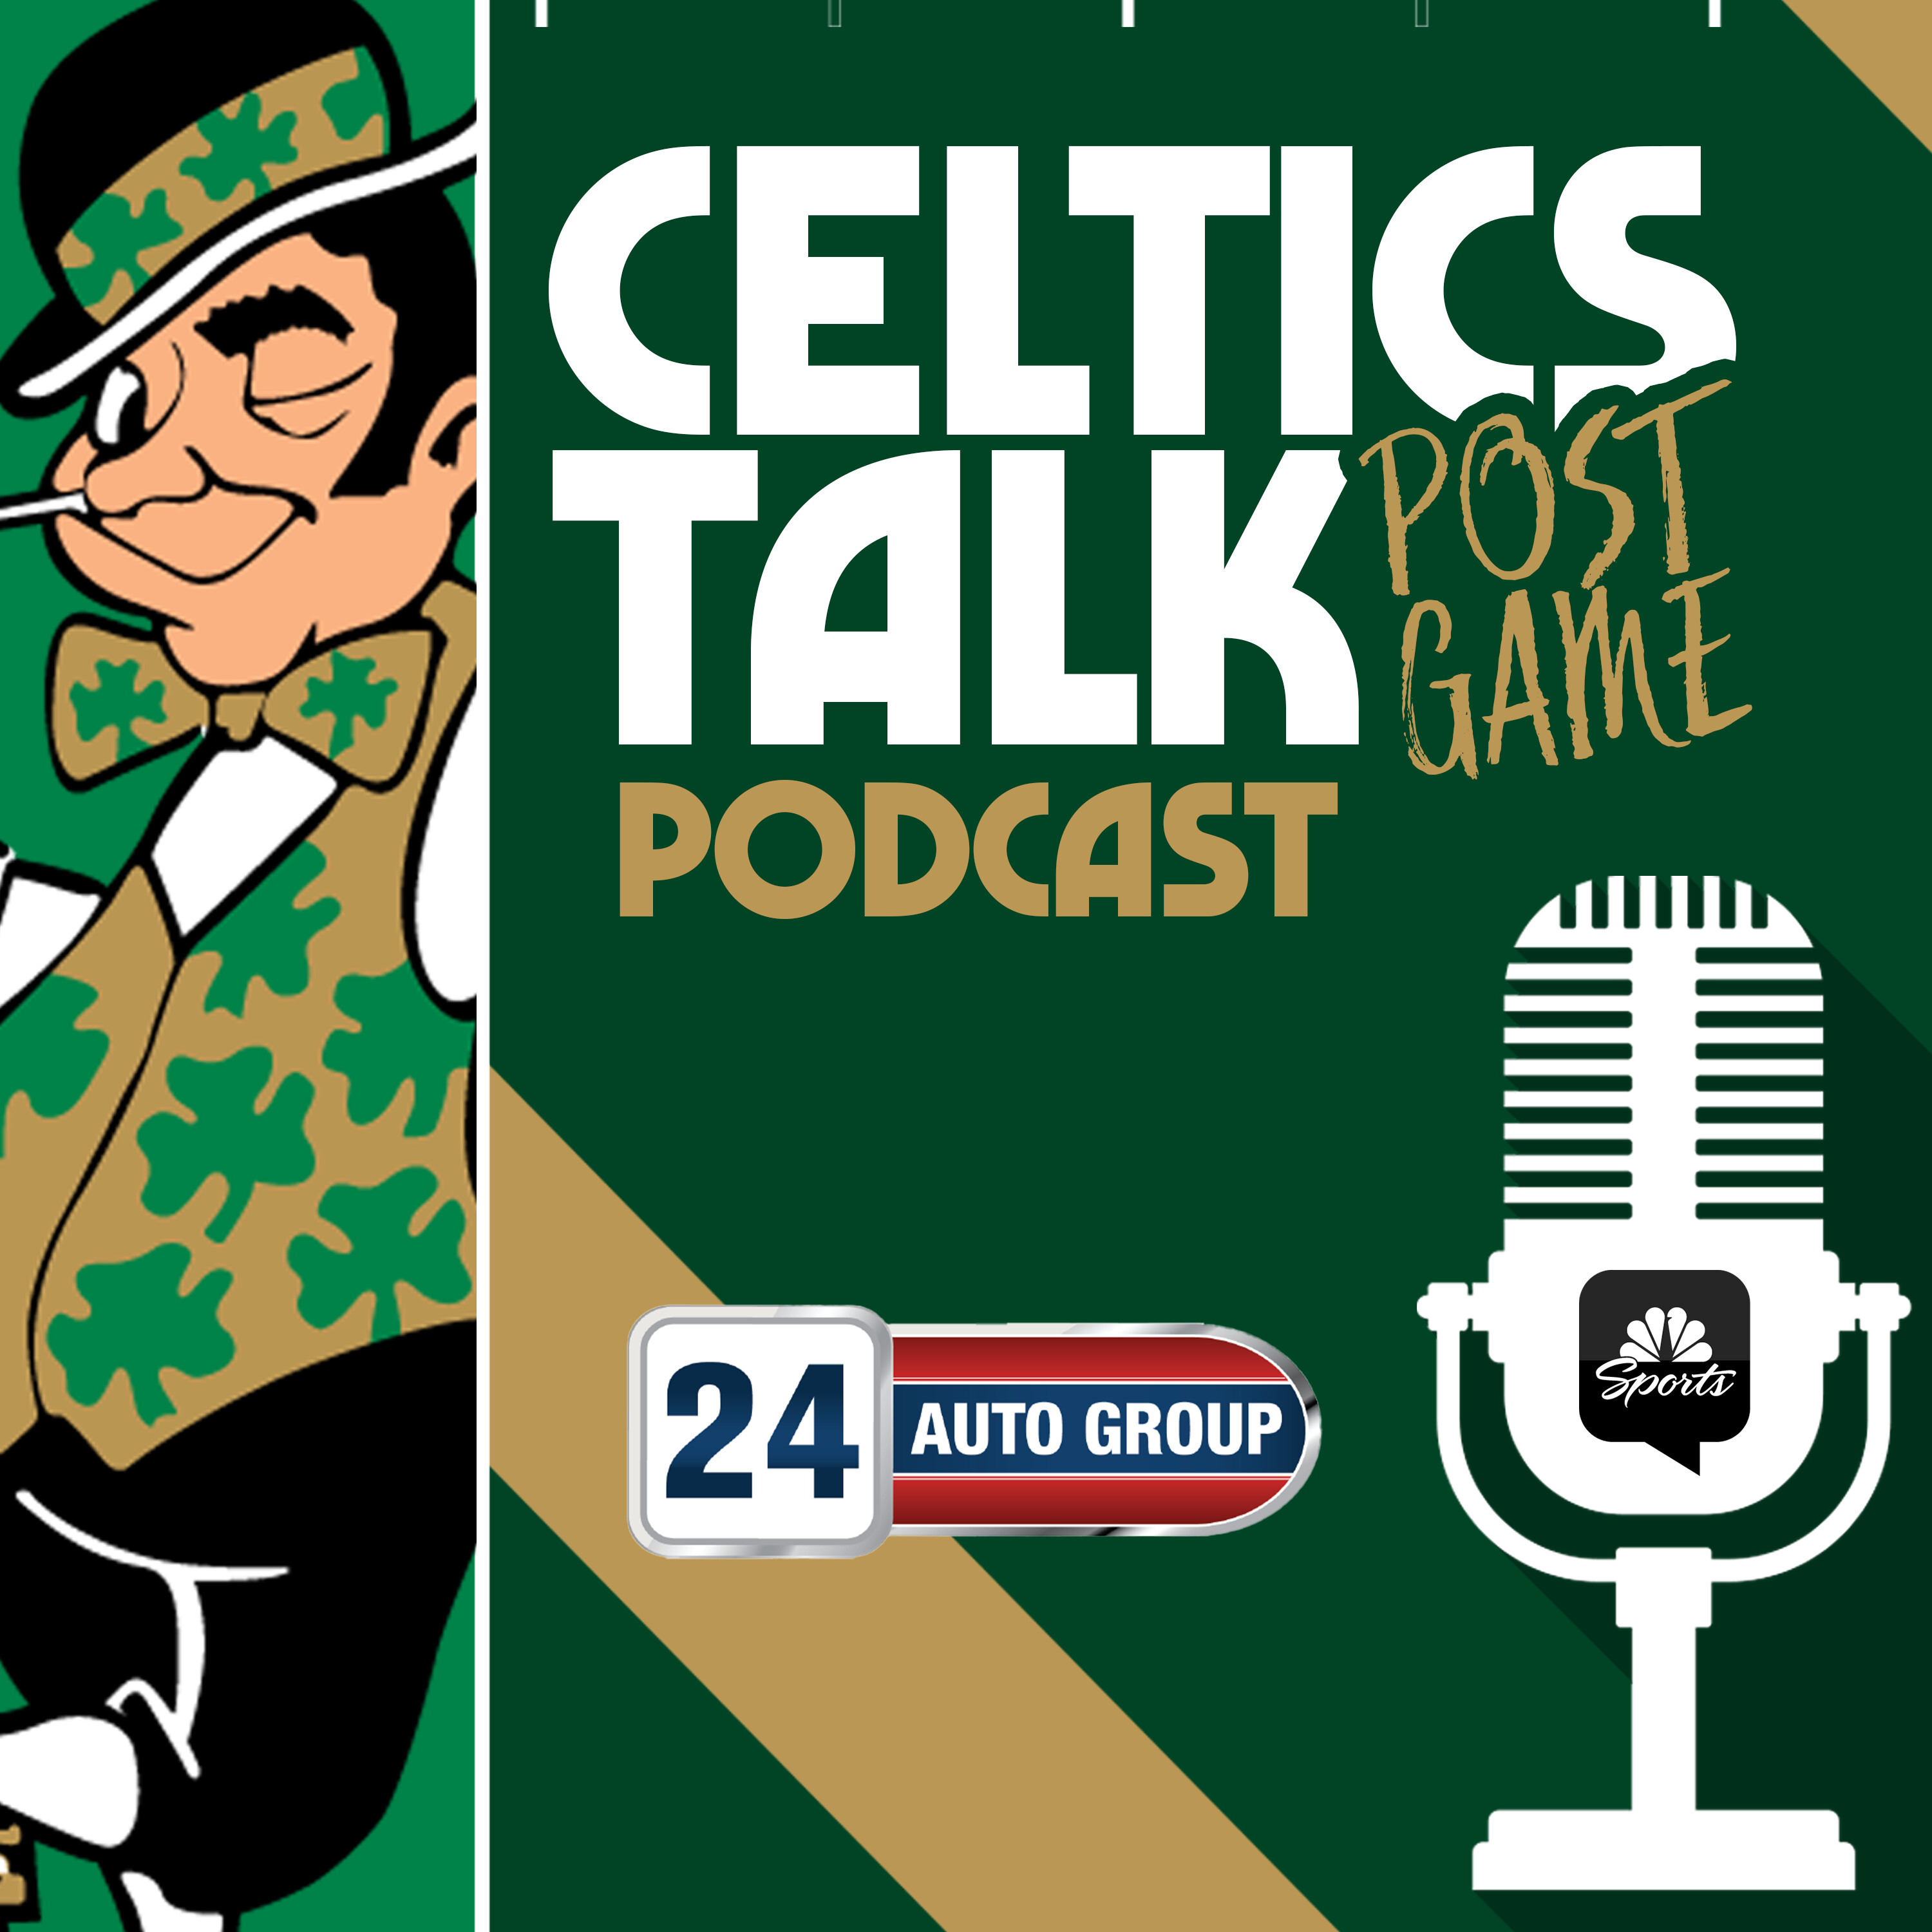 POSTGAME POD: Jayson Tatum ejected in all-around frustrating night for C’s in loss to Knicks